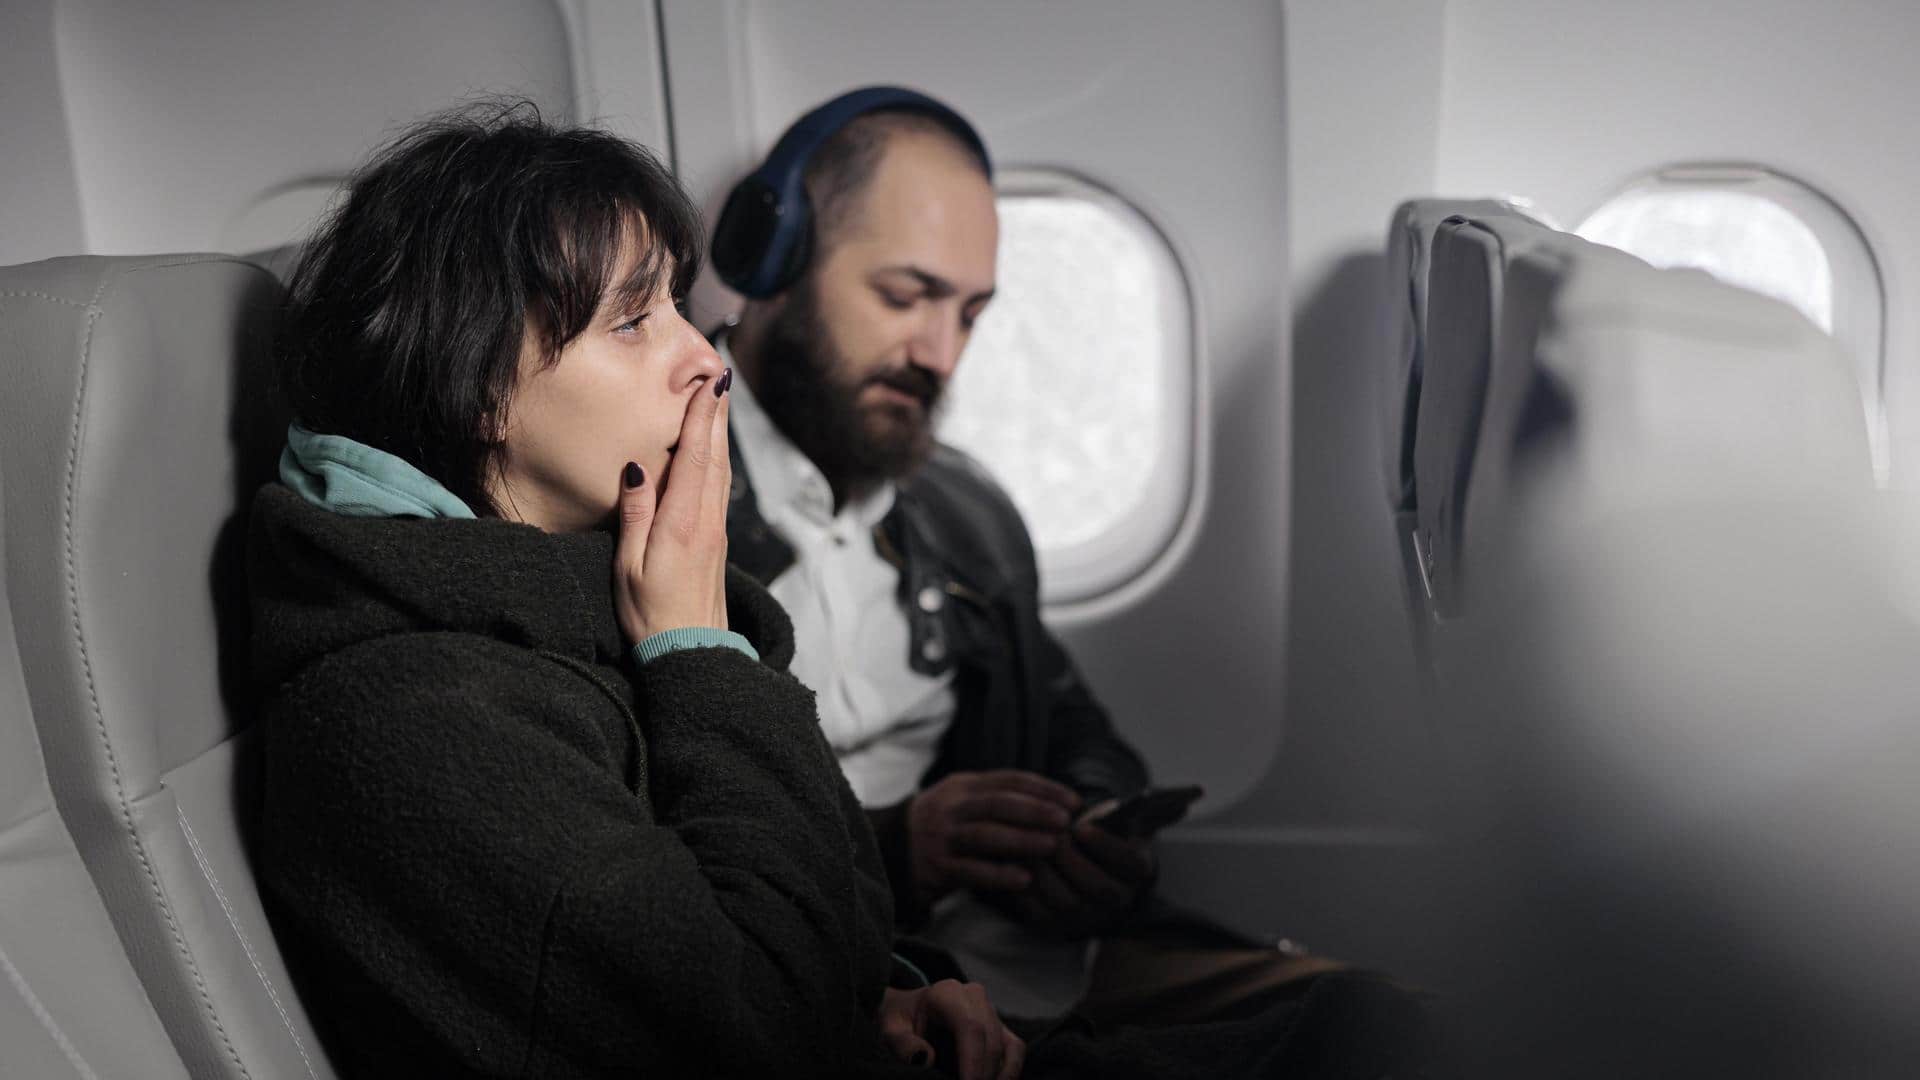 Fear flying? Here's how you can calm your anxiety